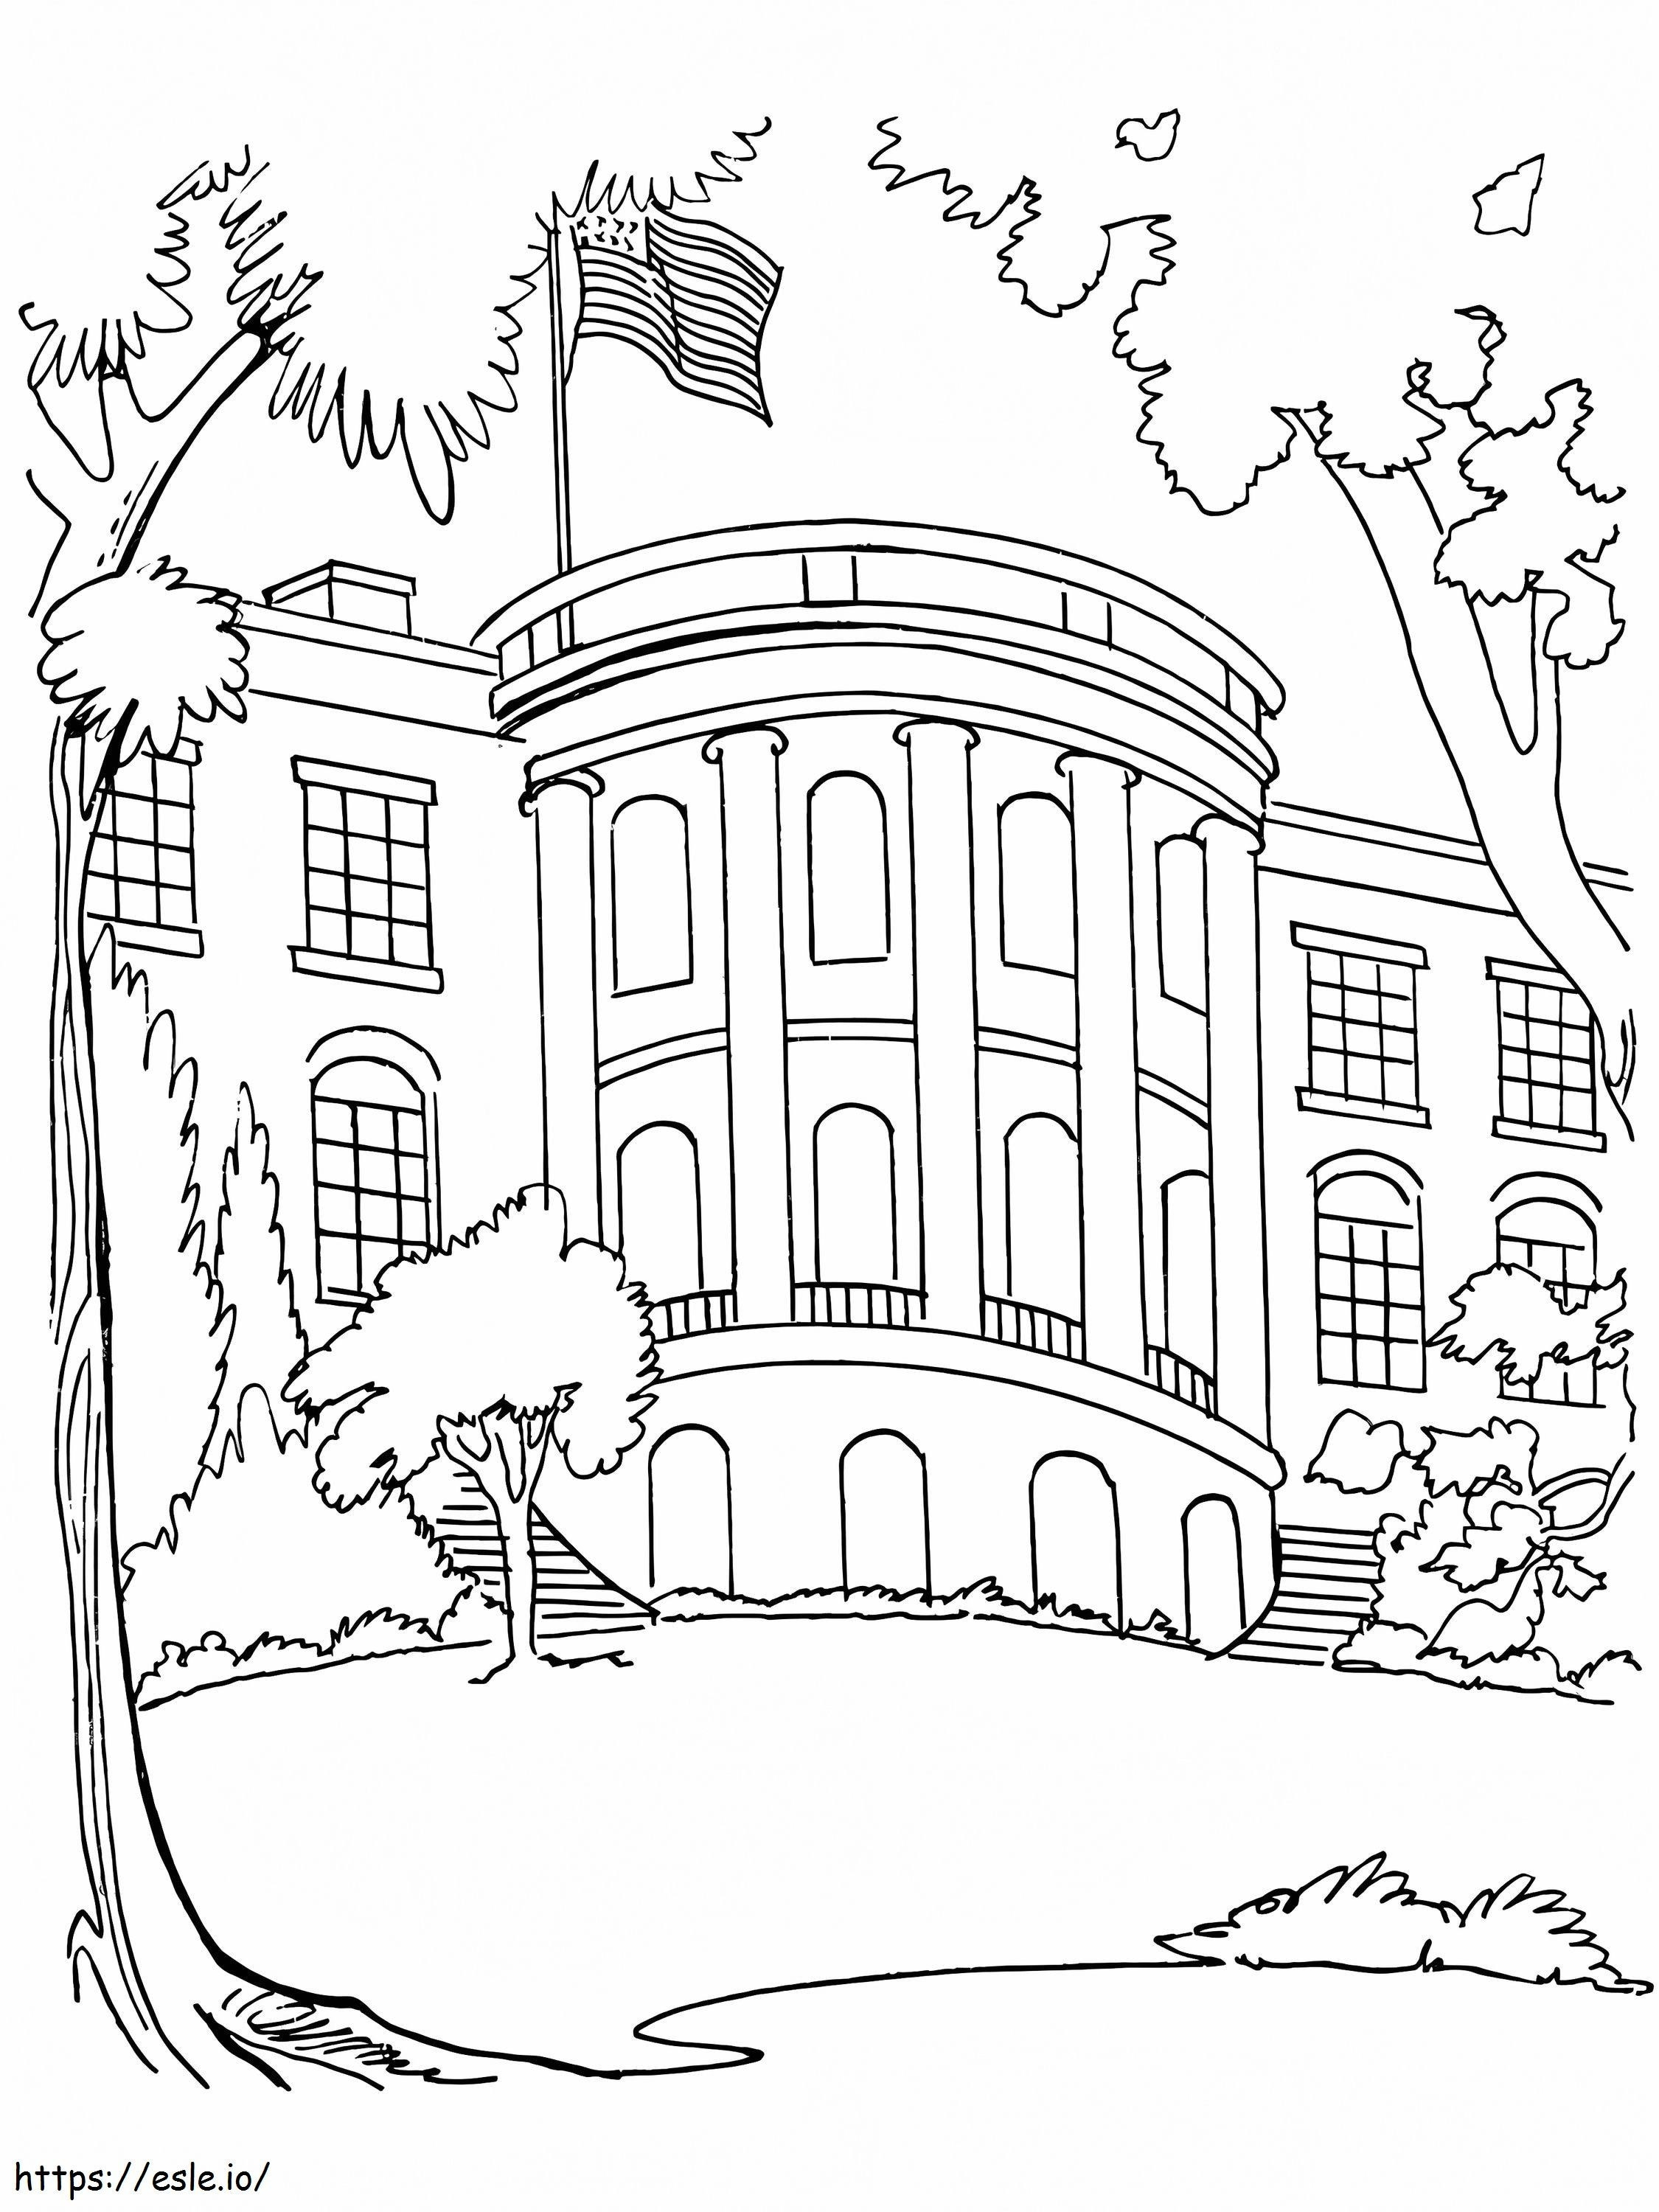 Free White House coloring page